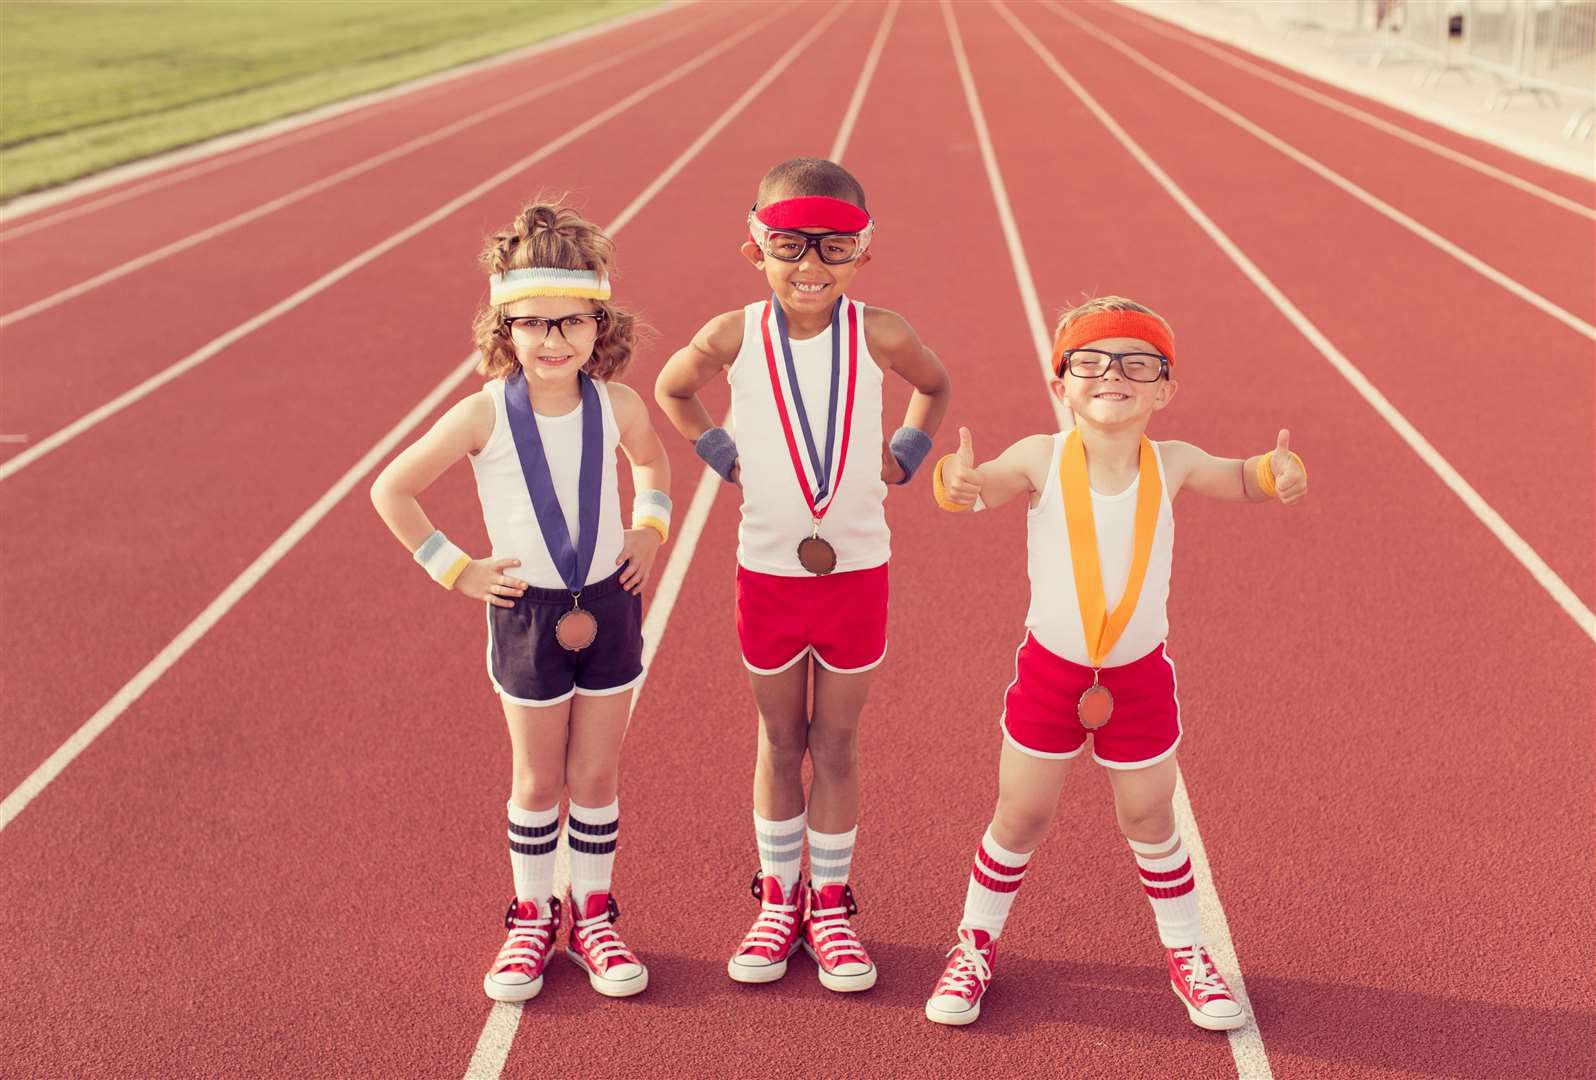 Children can apply to be Team GB mascots. Image: iStock.